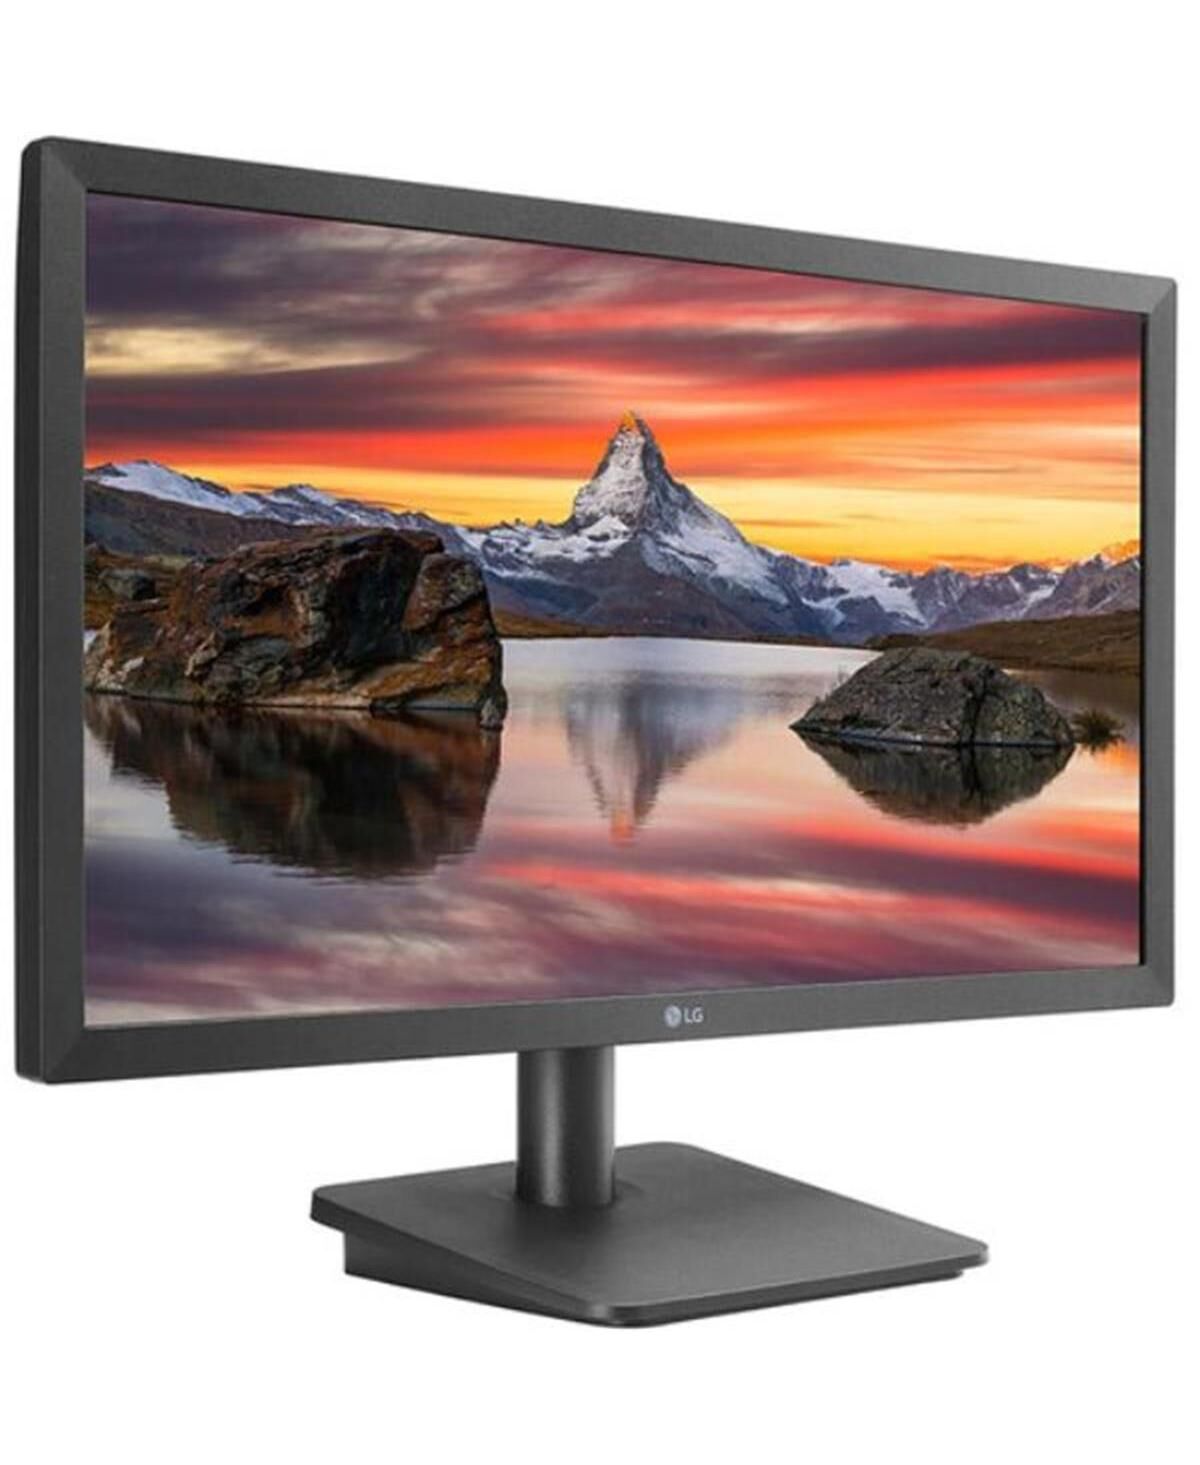 LG Commercial 22 in. 1920 x 1080 Monitor - Blue